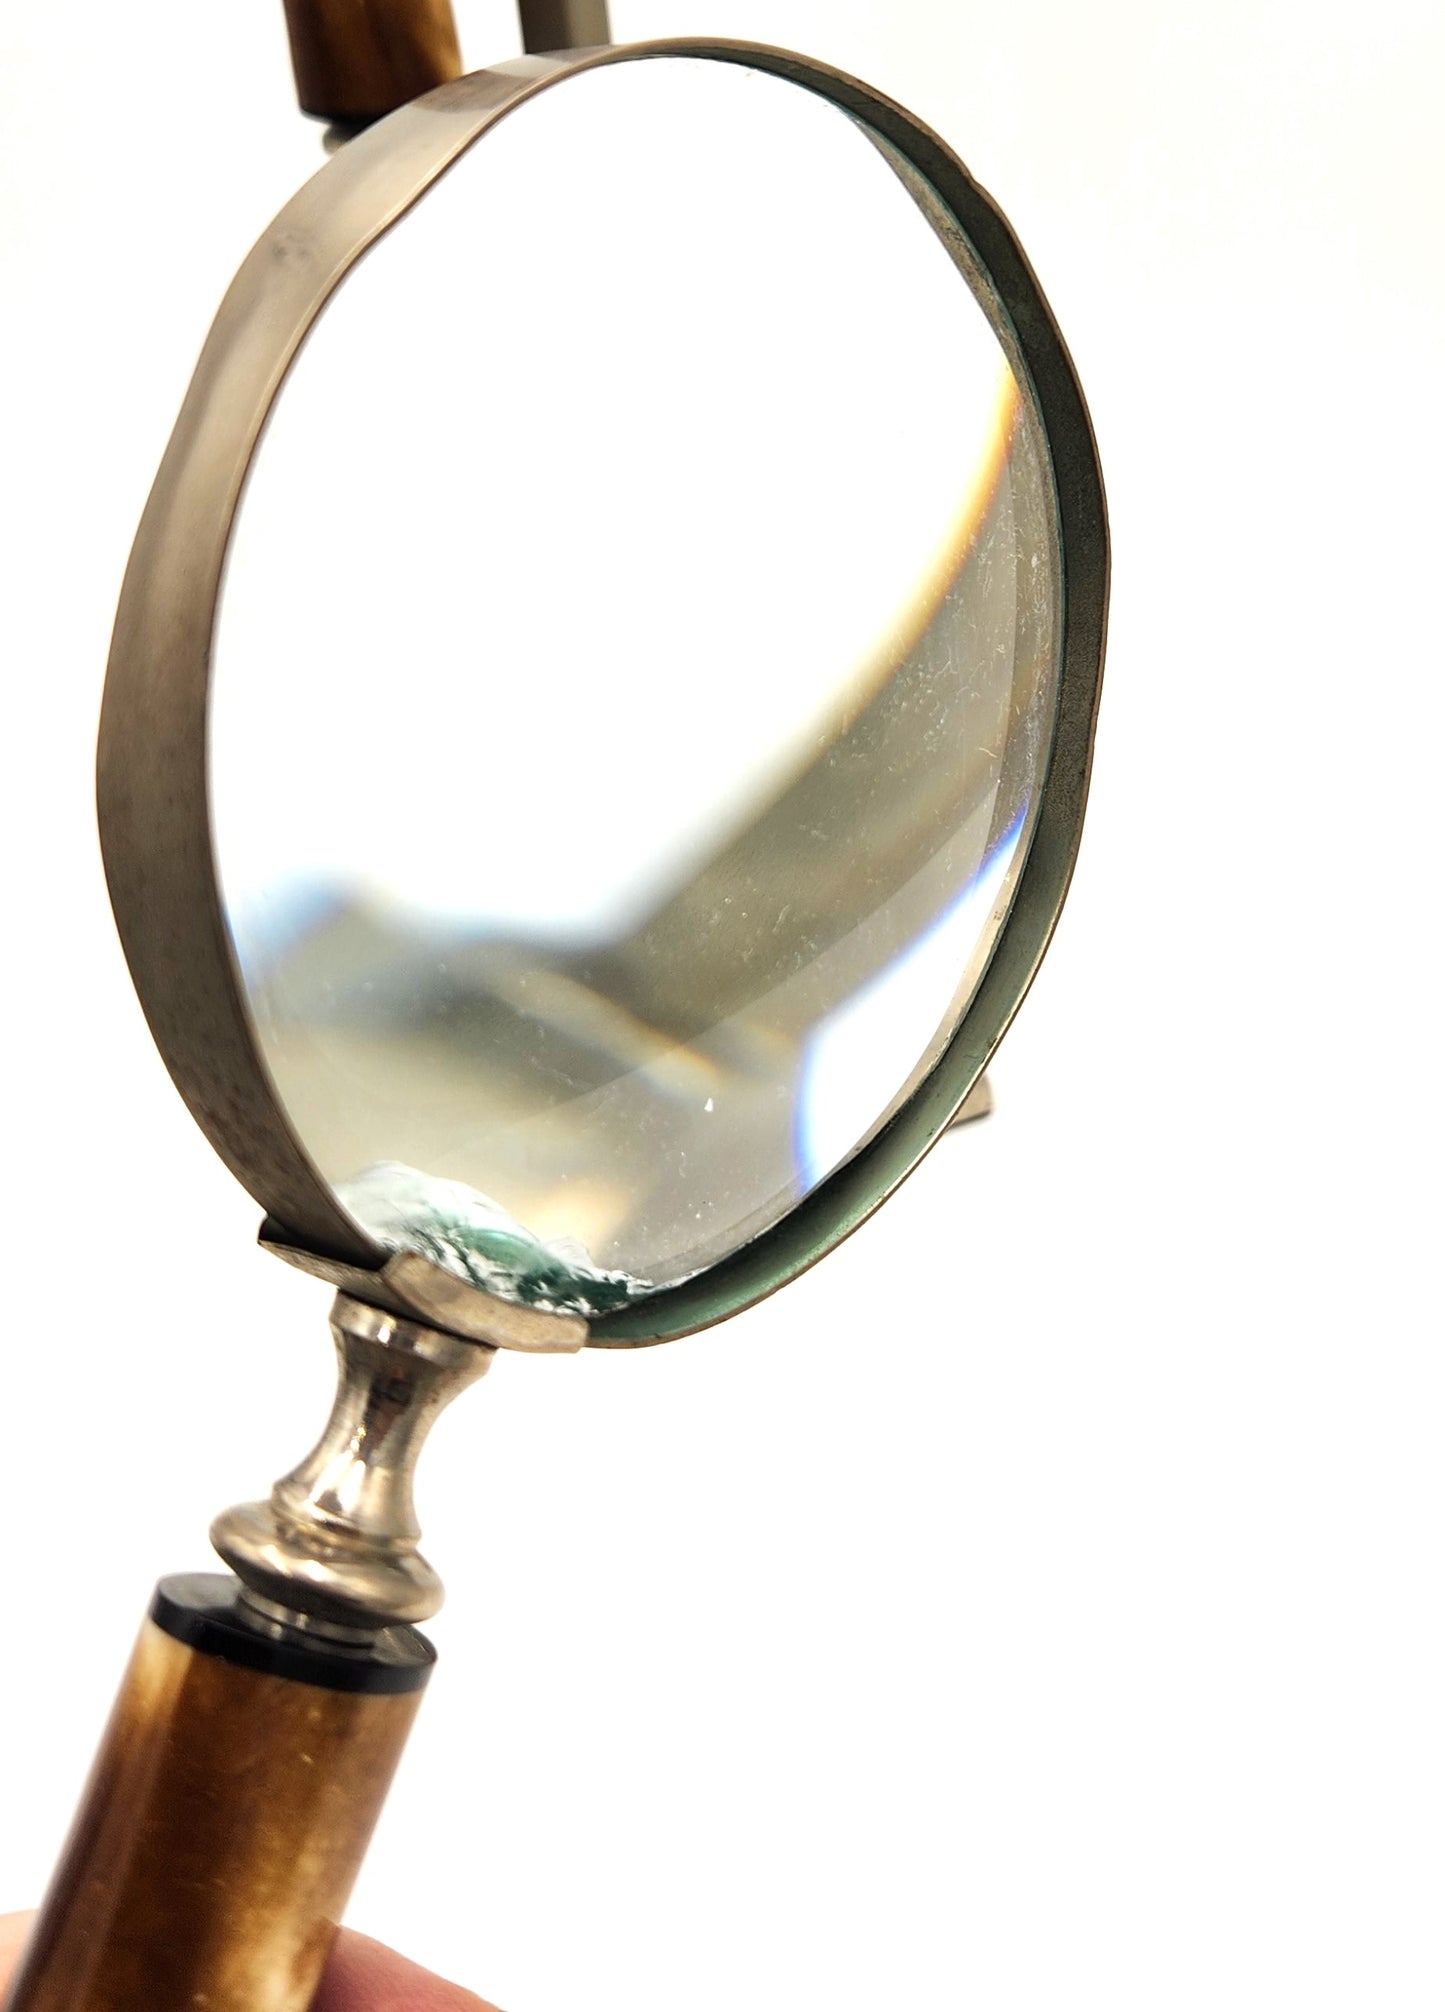 Letter Opener and Magnifying Glass on Stand - 32cm